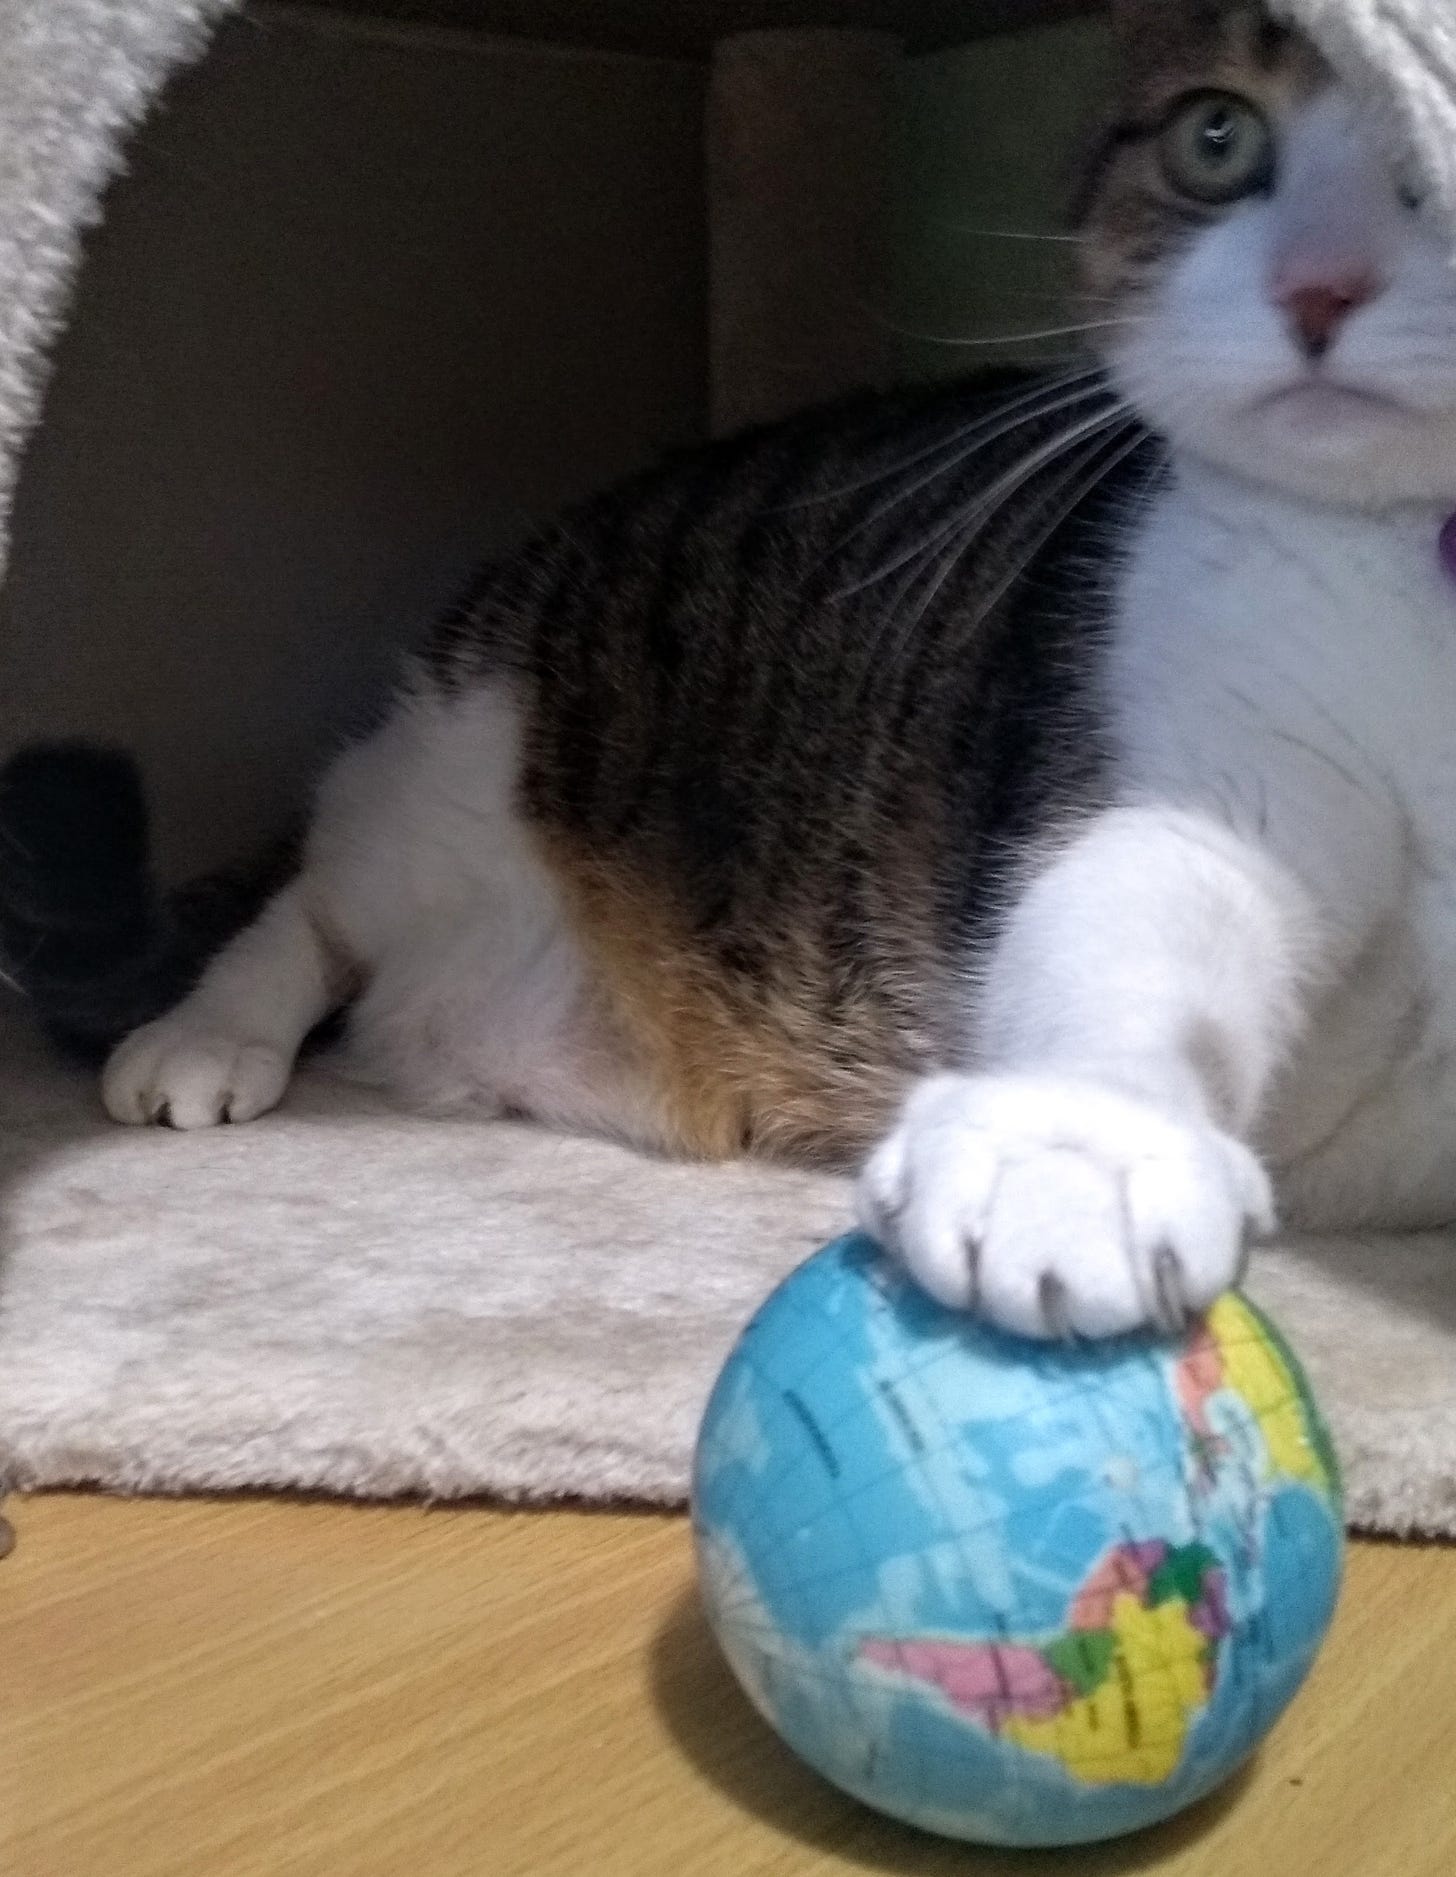 Cat pawing toy globe